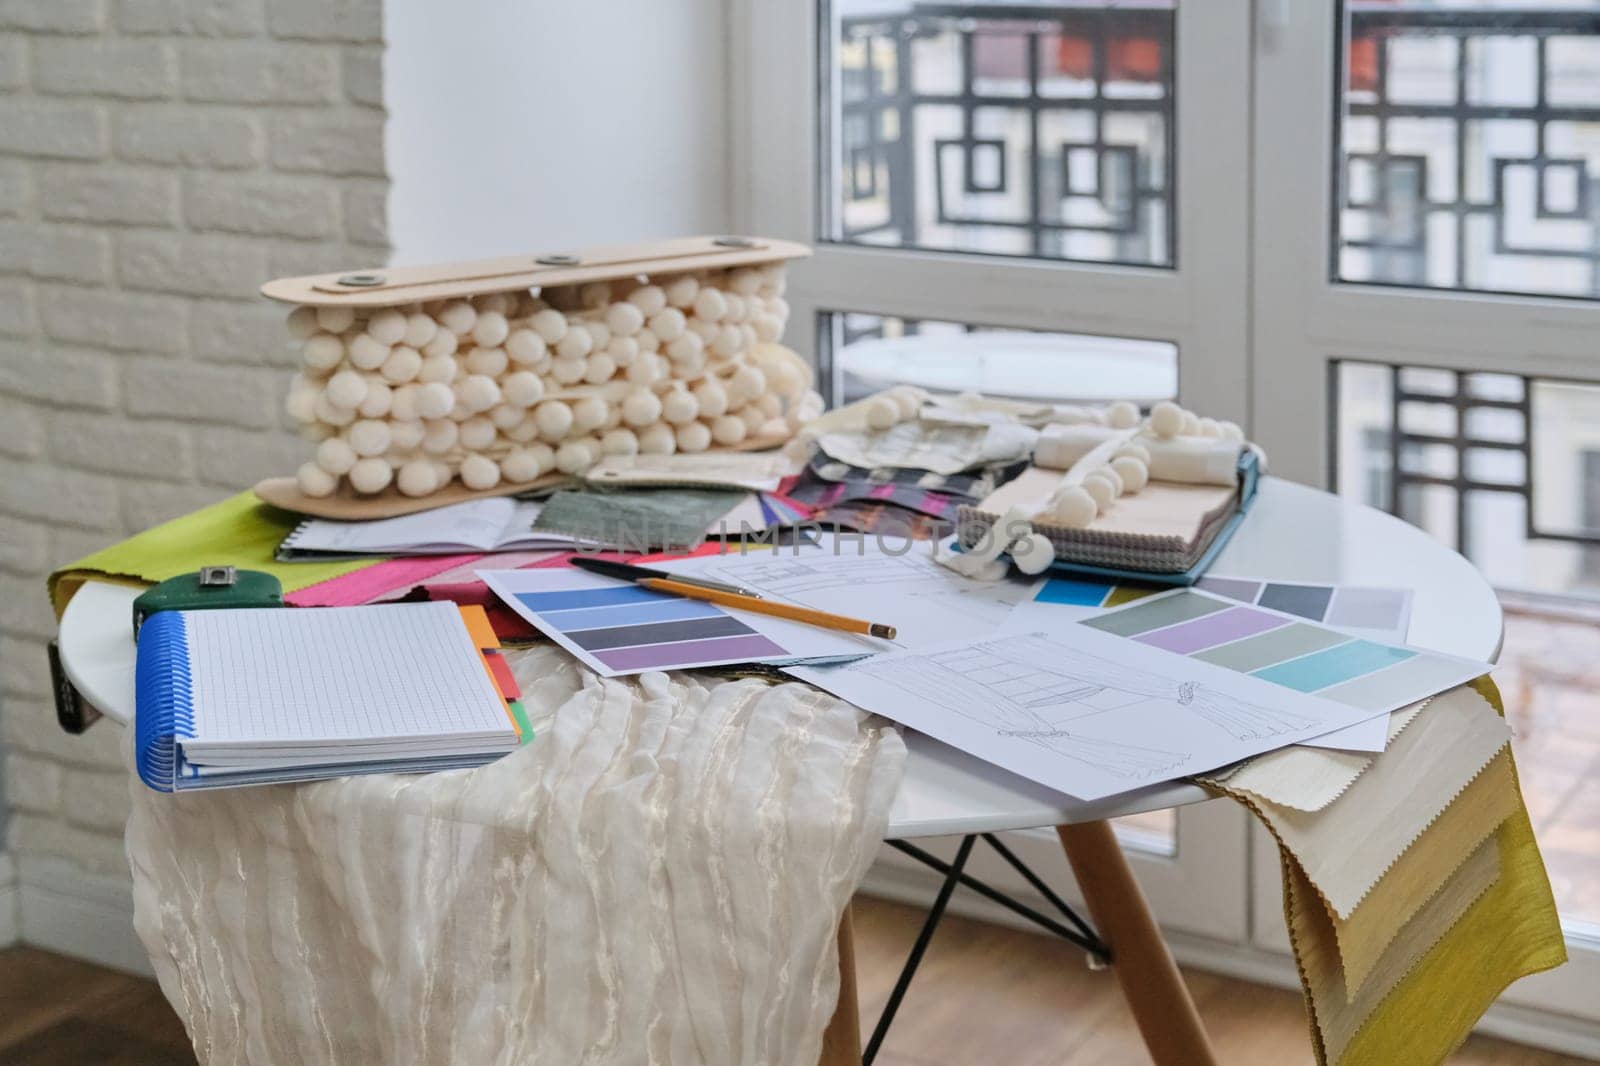 Workplace of textile designer, interior decorator. On the desk palettes with fabrics, drawings with models of curtains, accessories, notebook with notes